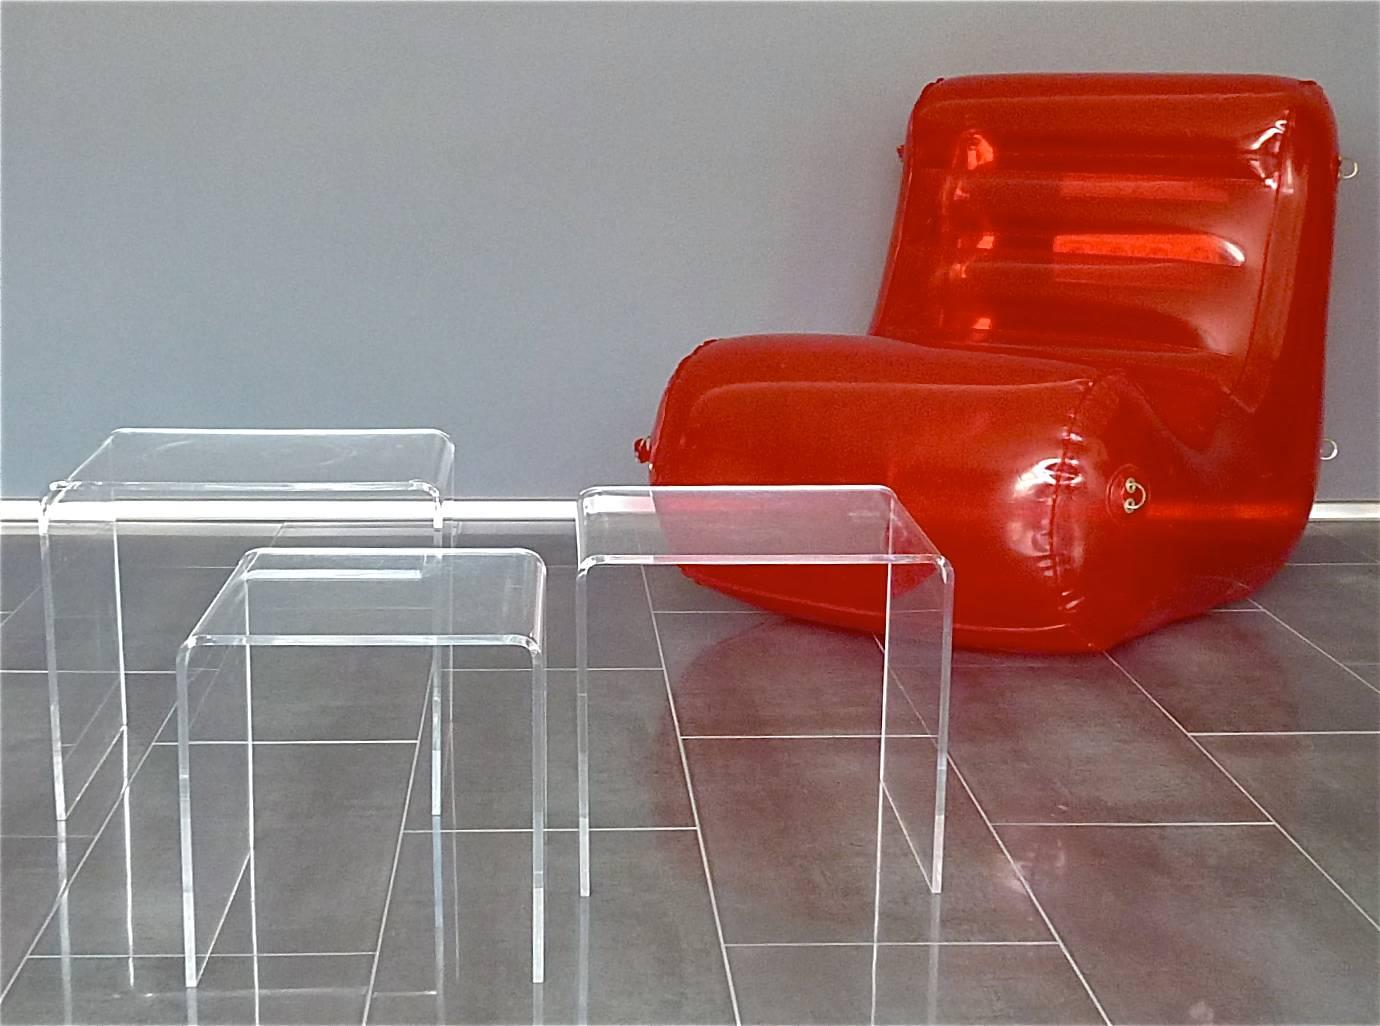 Cool Space Age Lucite / acrylic / plexiglass op art / pop art set of three nesting tables, Italy, 1960-1970. Measures: The largest table is 35.5 cm / 13.98 inches tall, 39.5 cm / 15.55 inches wide and 33 cm / 12.99 inches deep. The middle one has a